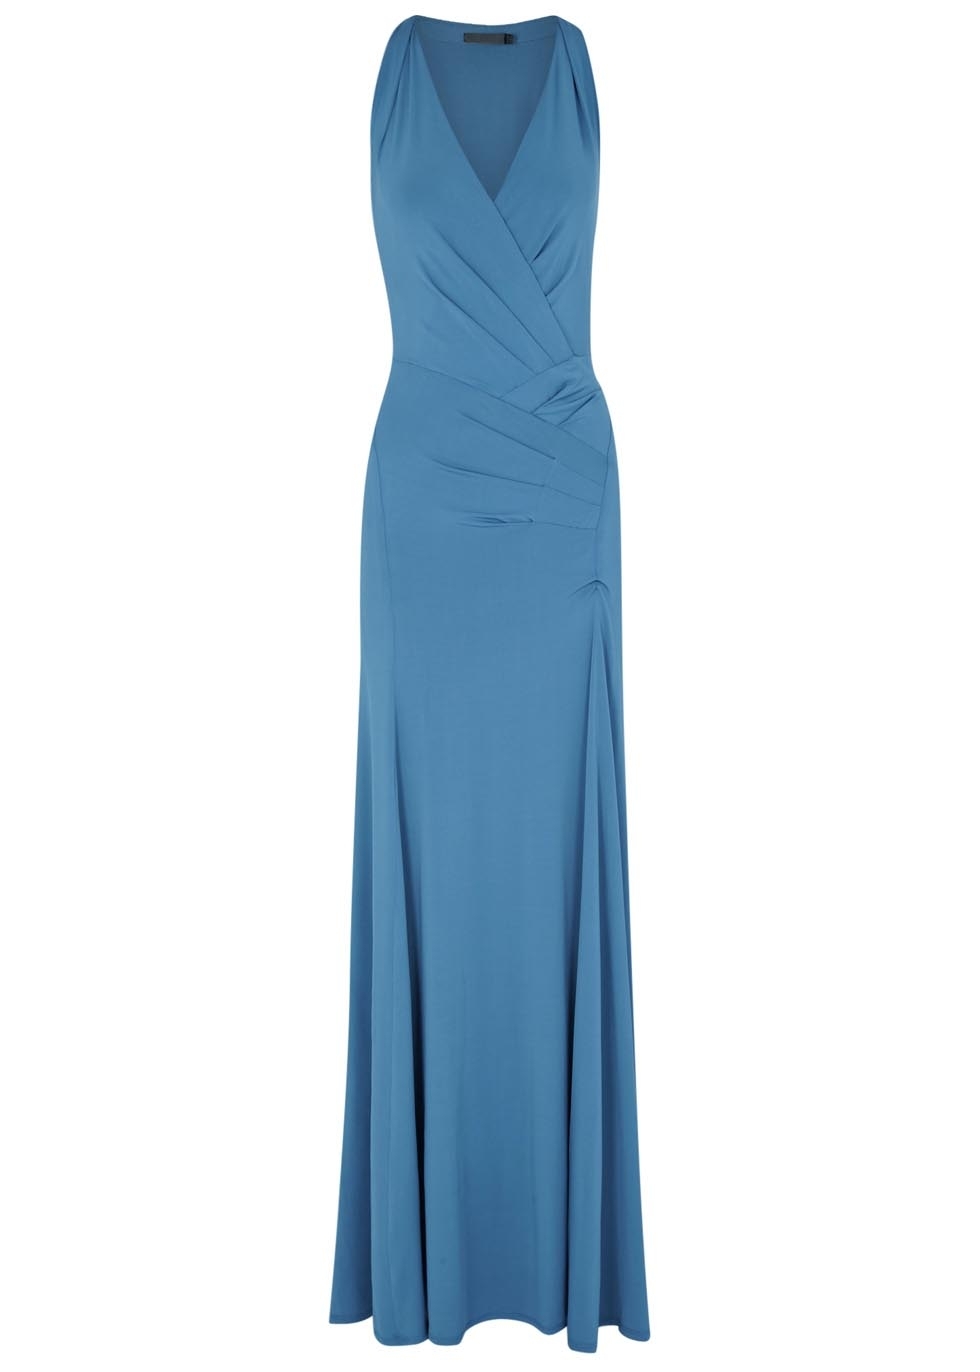 Petrol blue jersey gown